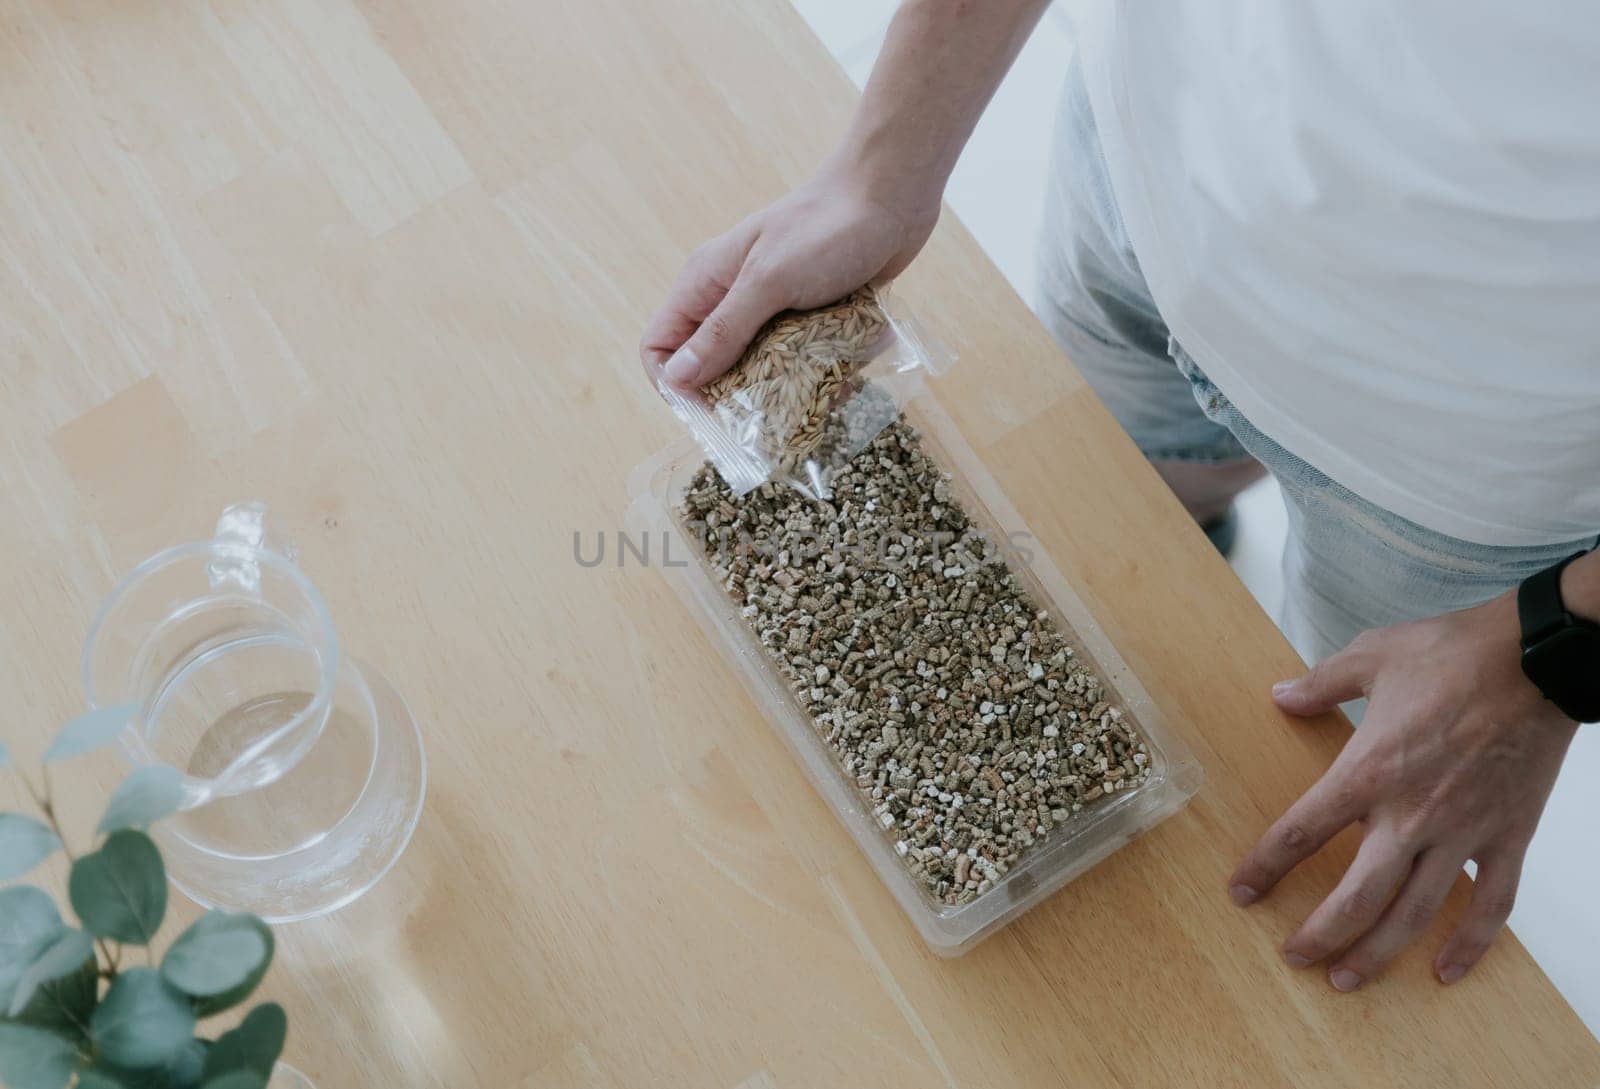 A young man plants wheat seeds in a container. by Nataliya